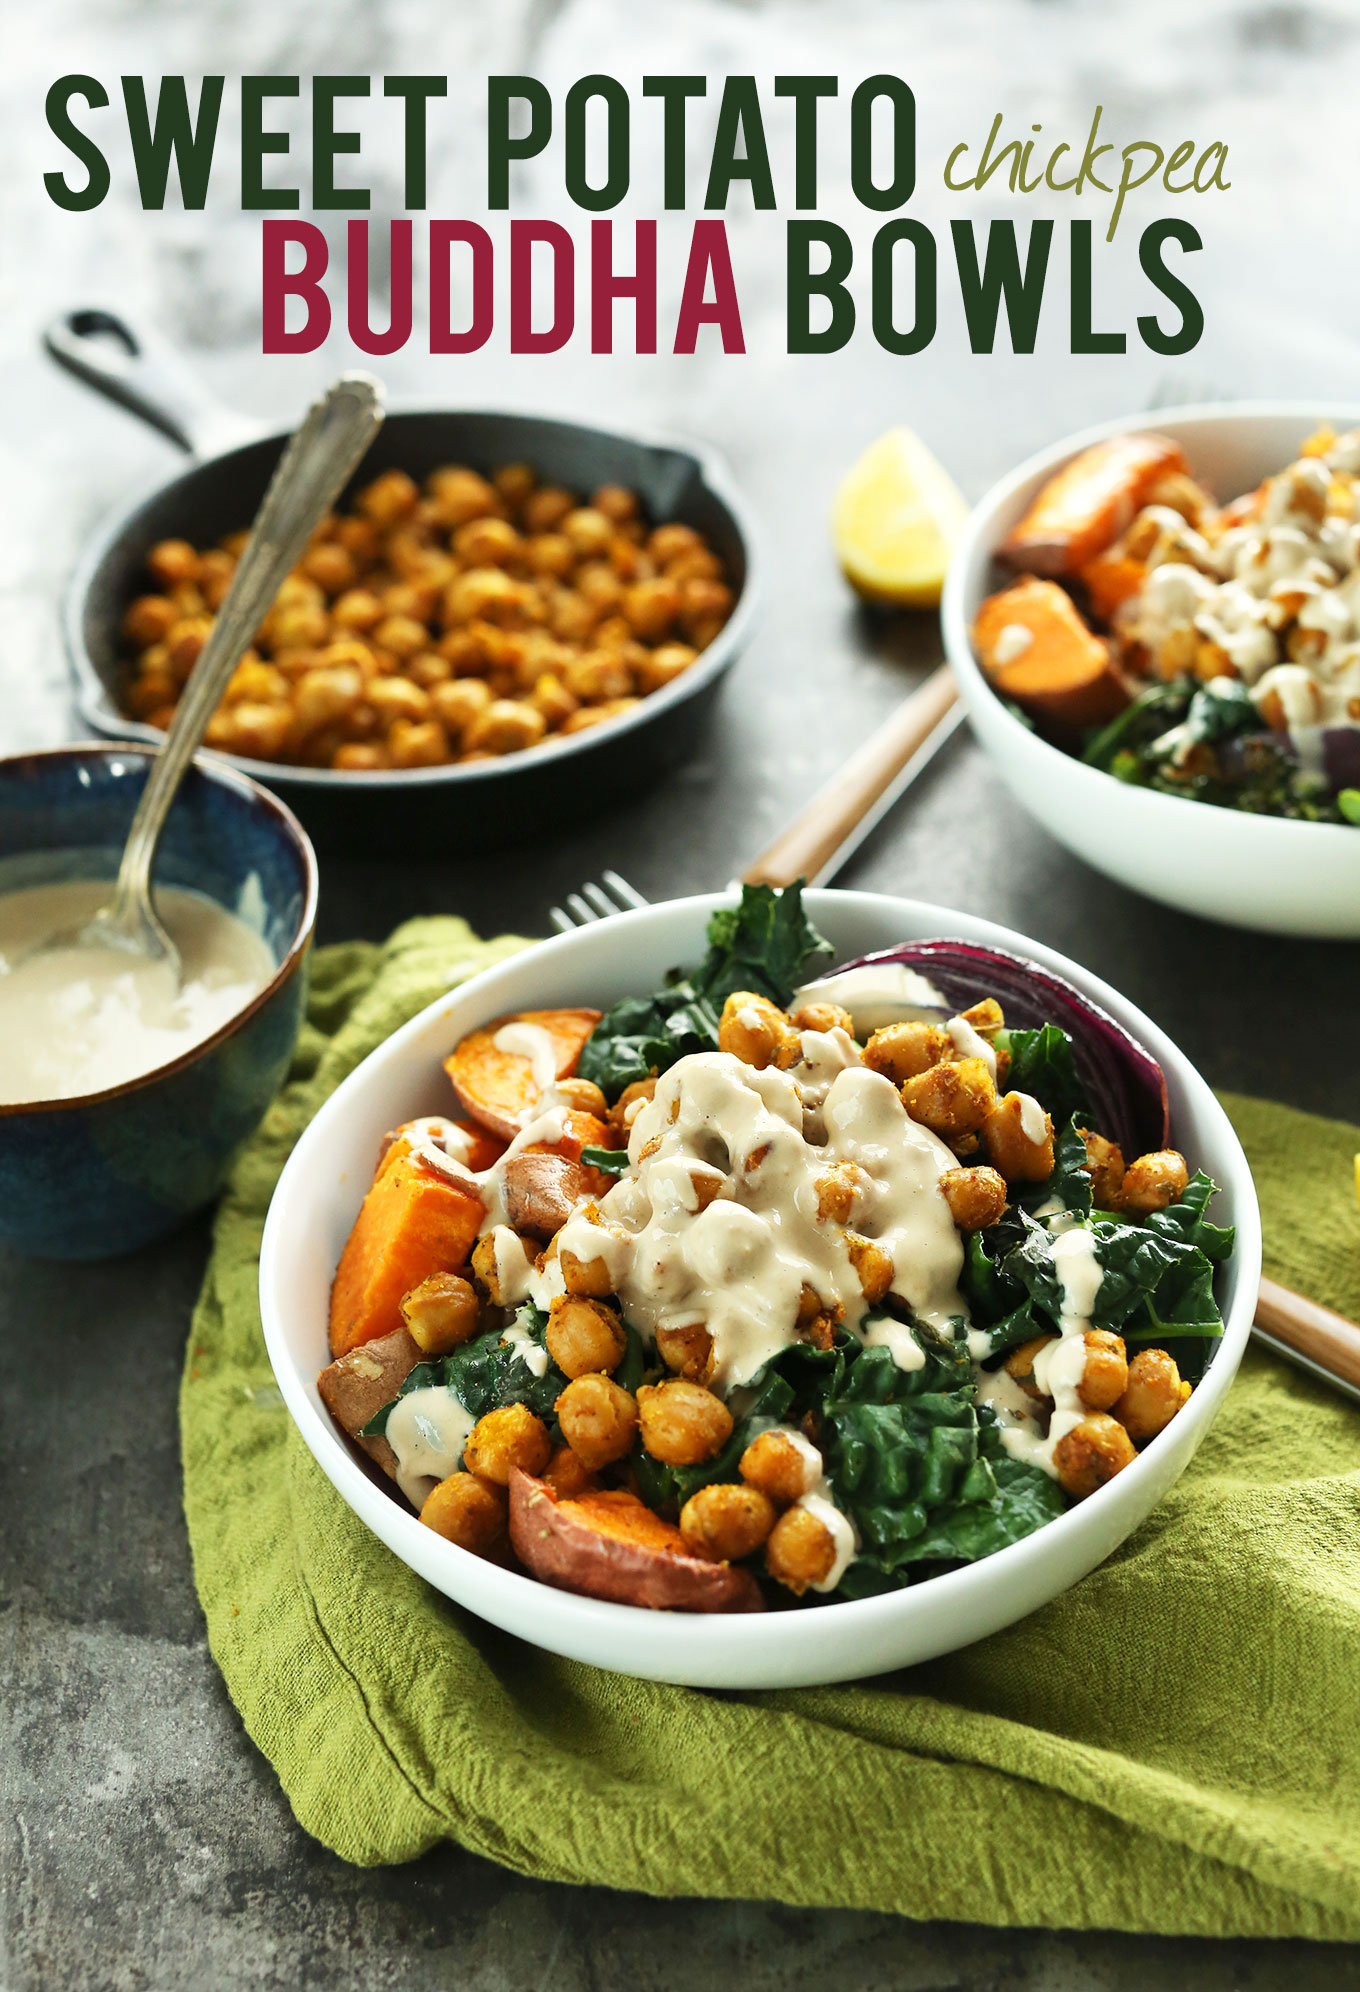 Big serving of our Chickpea Sweet Potato Buddha Bowl recipe topped with Tahini Lemon Maple Sauce